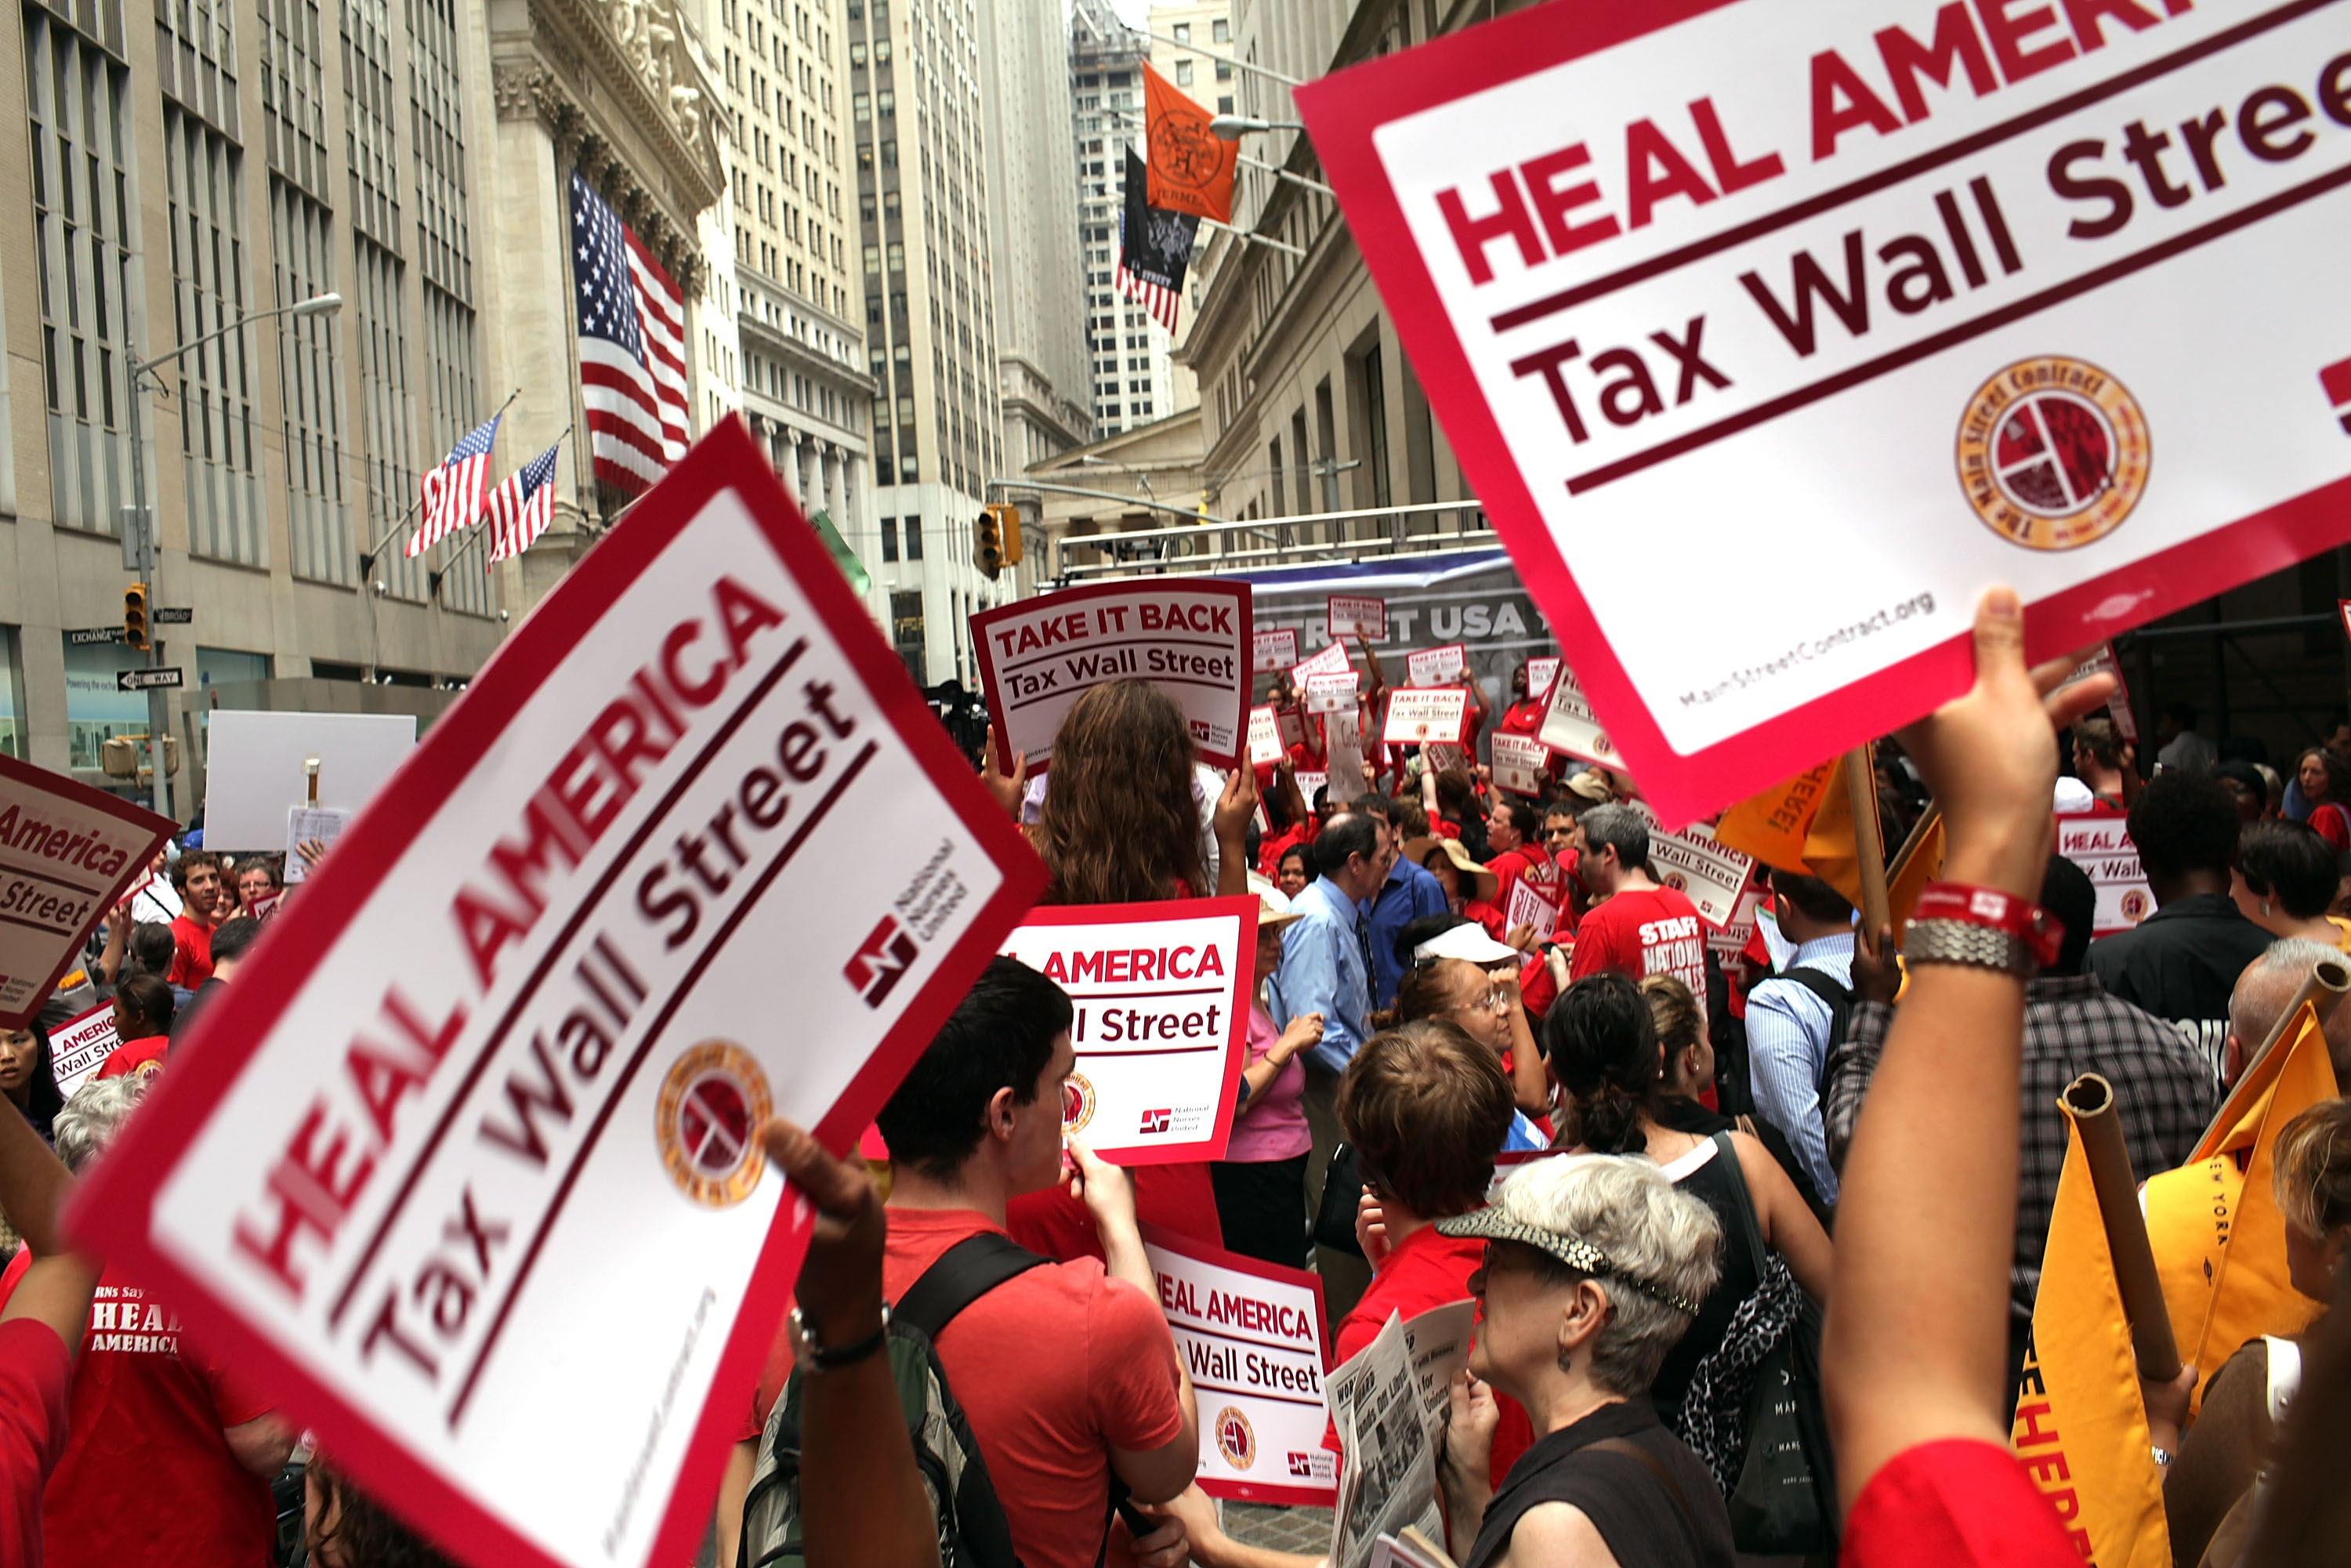 Members of the nurses union, National Nurses United, and other workers converge on Wall Street to protest against financial intuitions and inequality on June 22, 2011 in New York City.